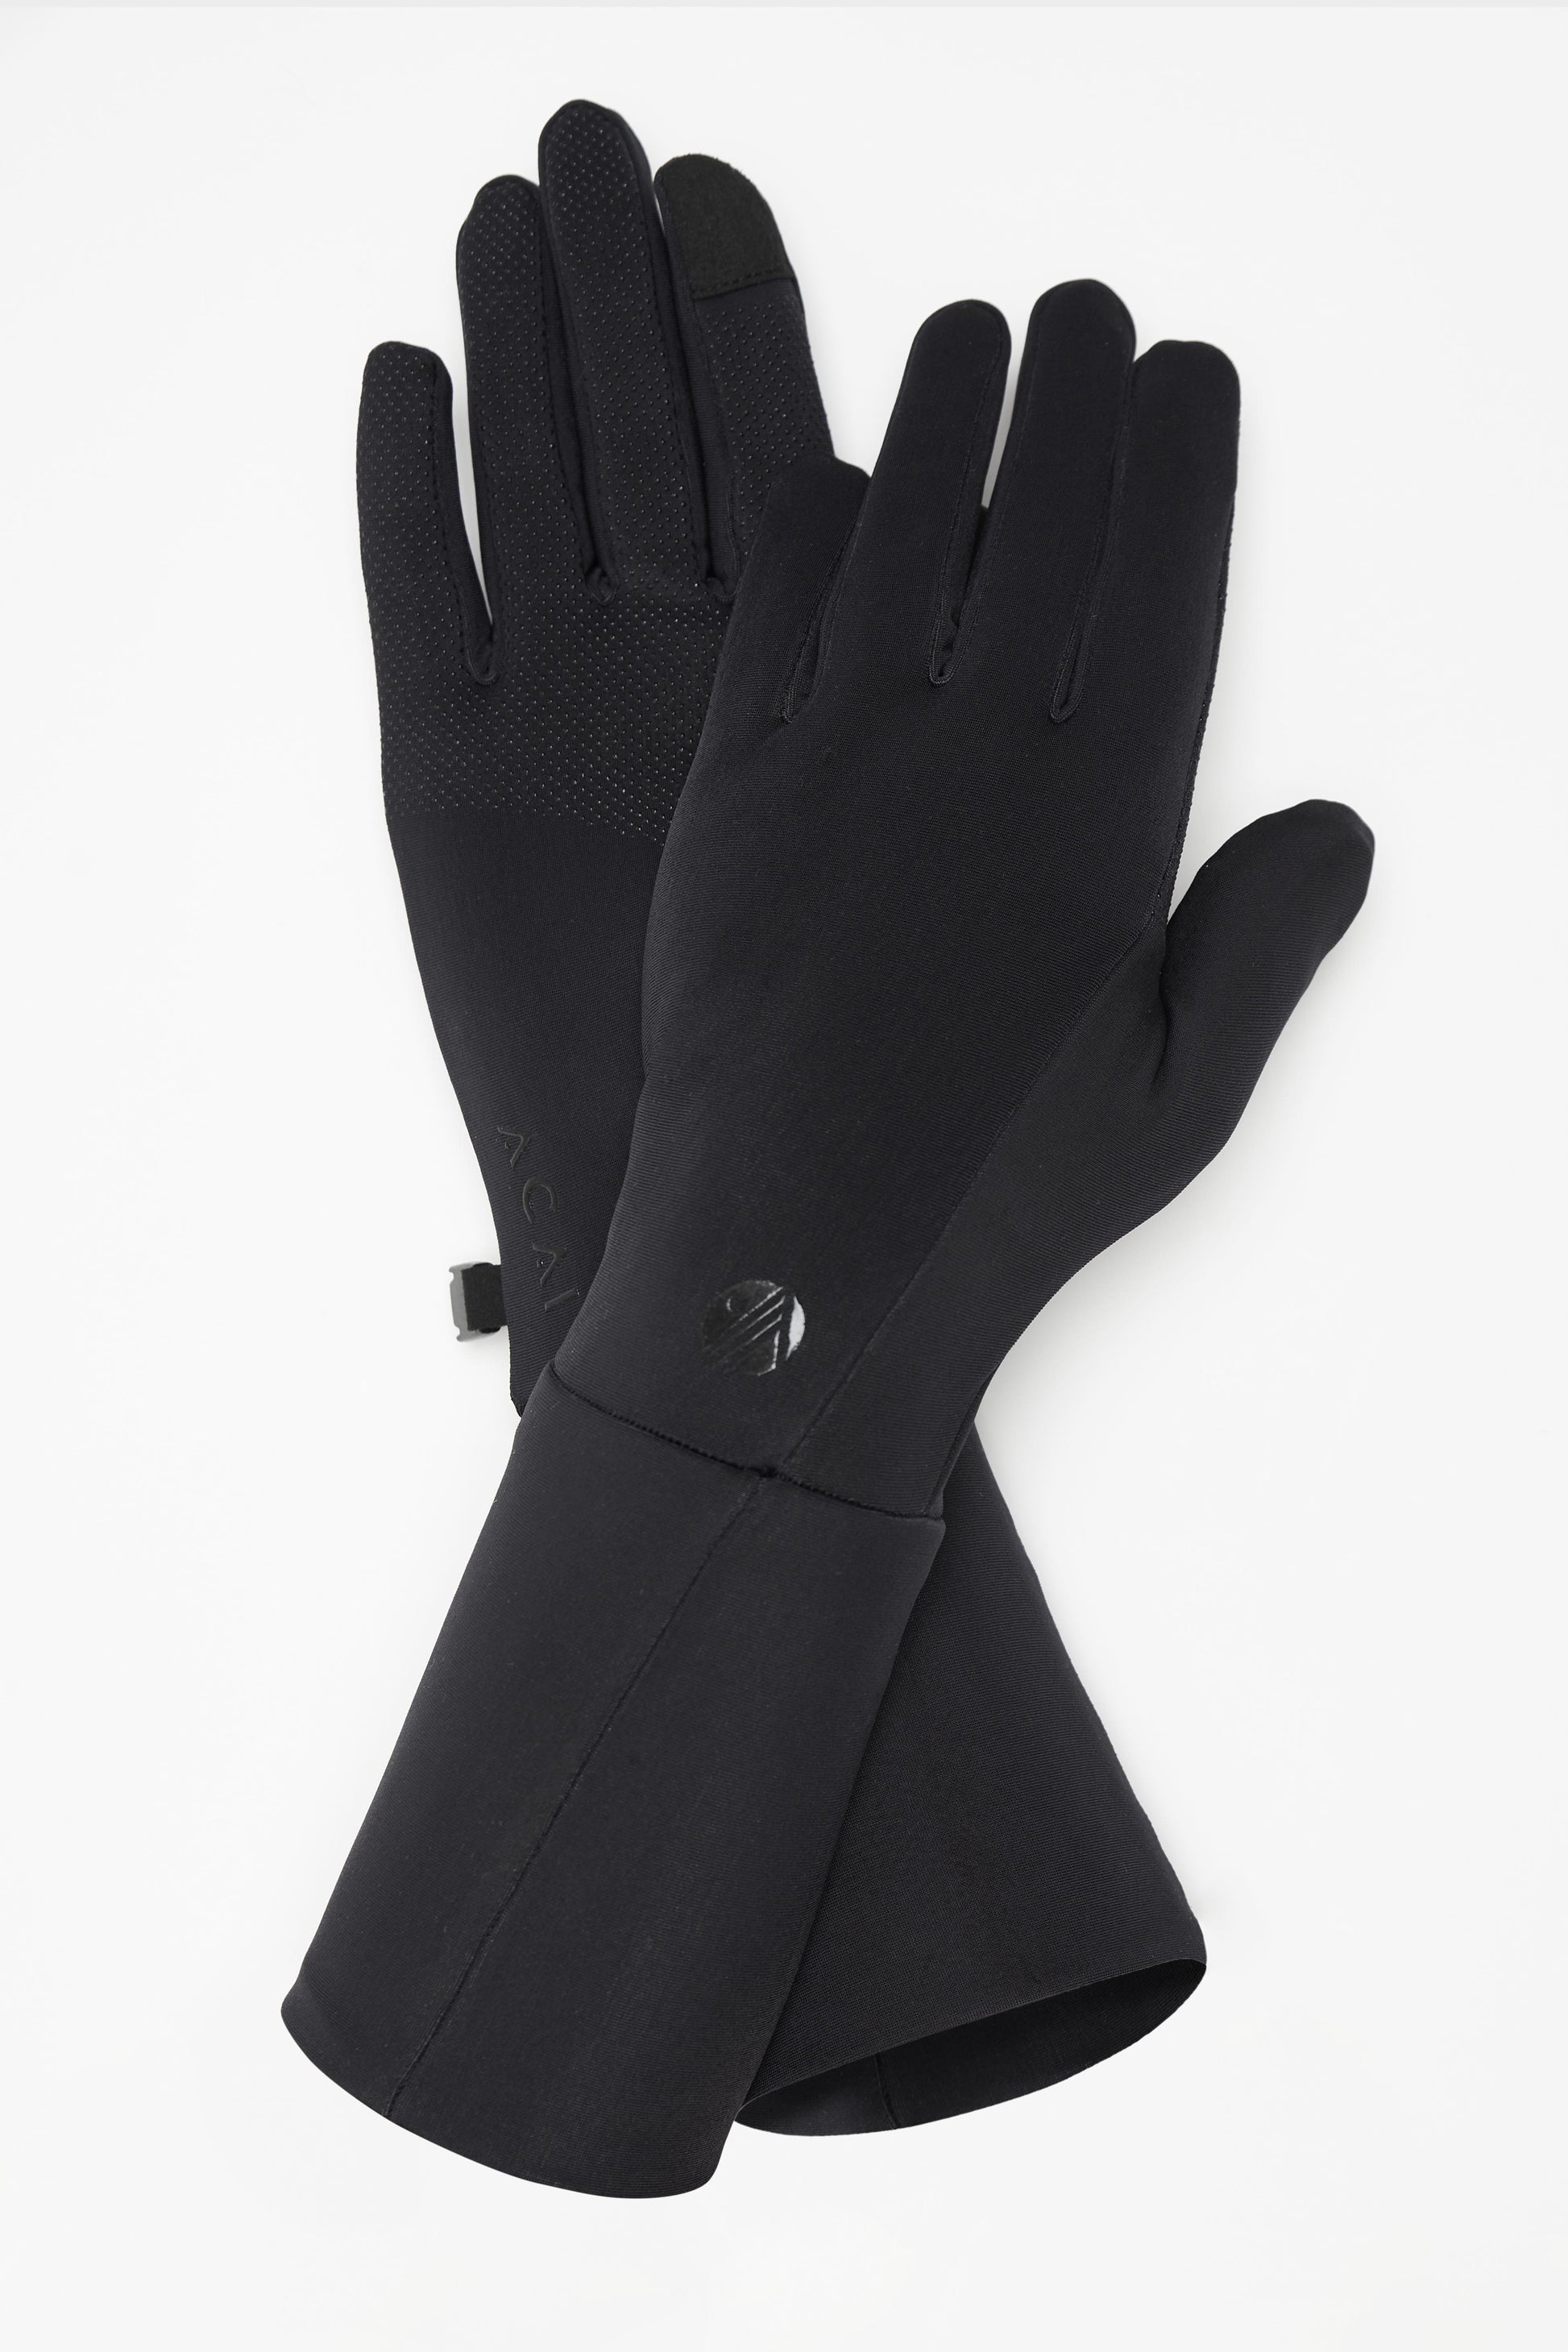 Outdoor Performance Gloves - Black Accessories  